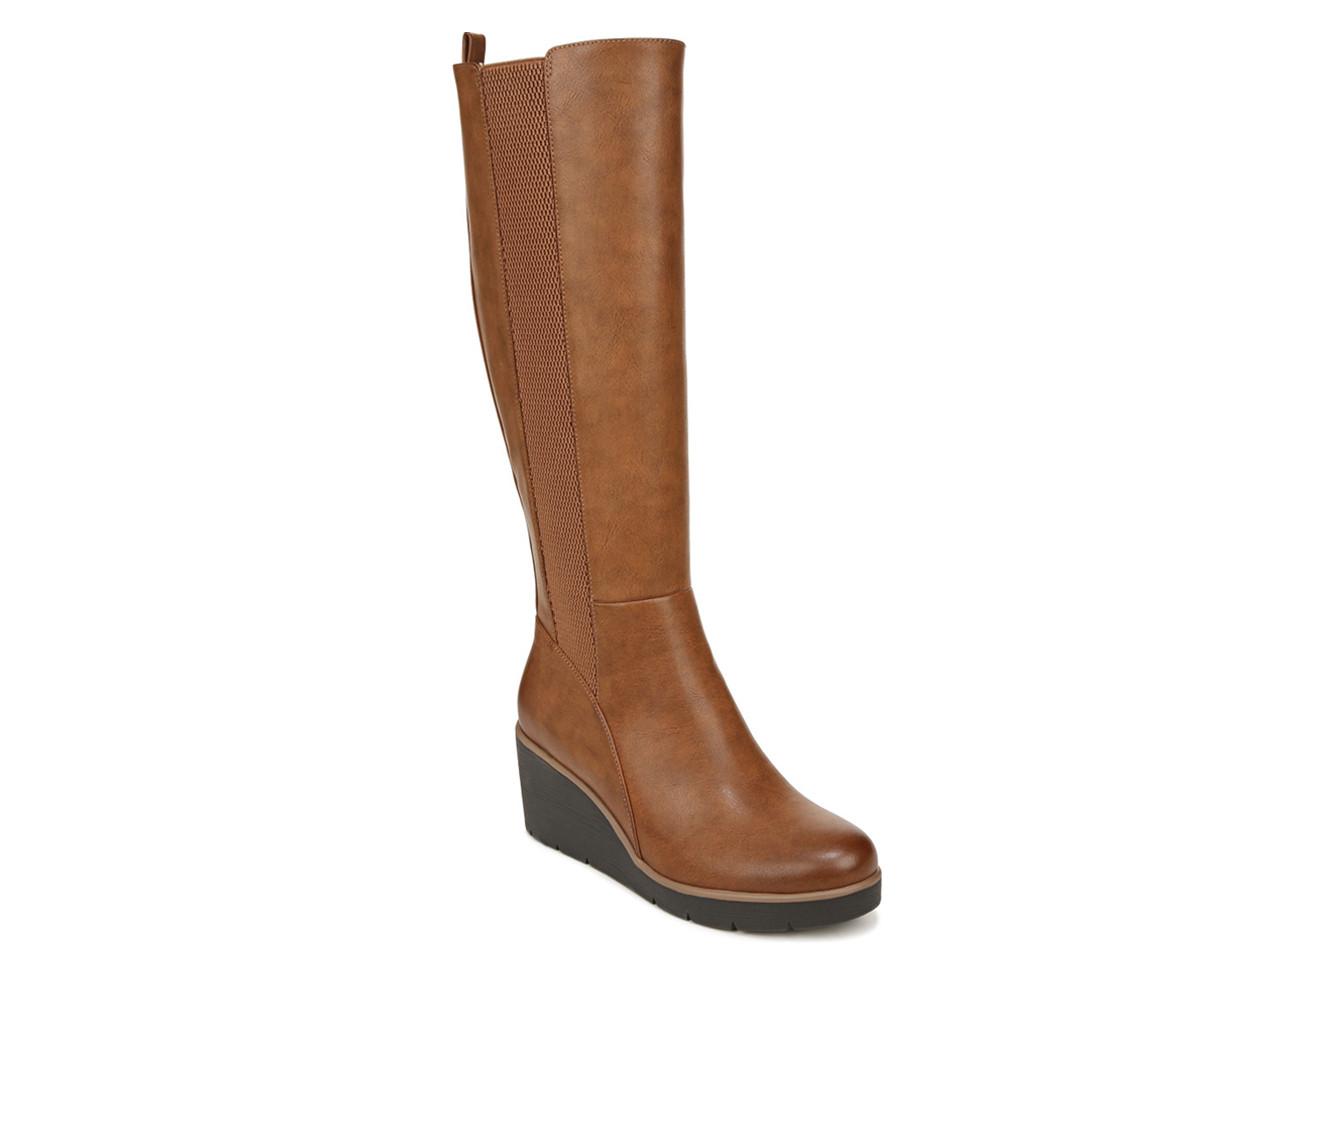 Women's Soul Naturalizer Adrian Knee High Wedge Boots